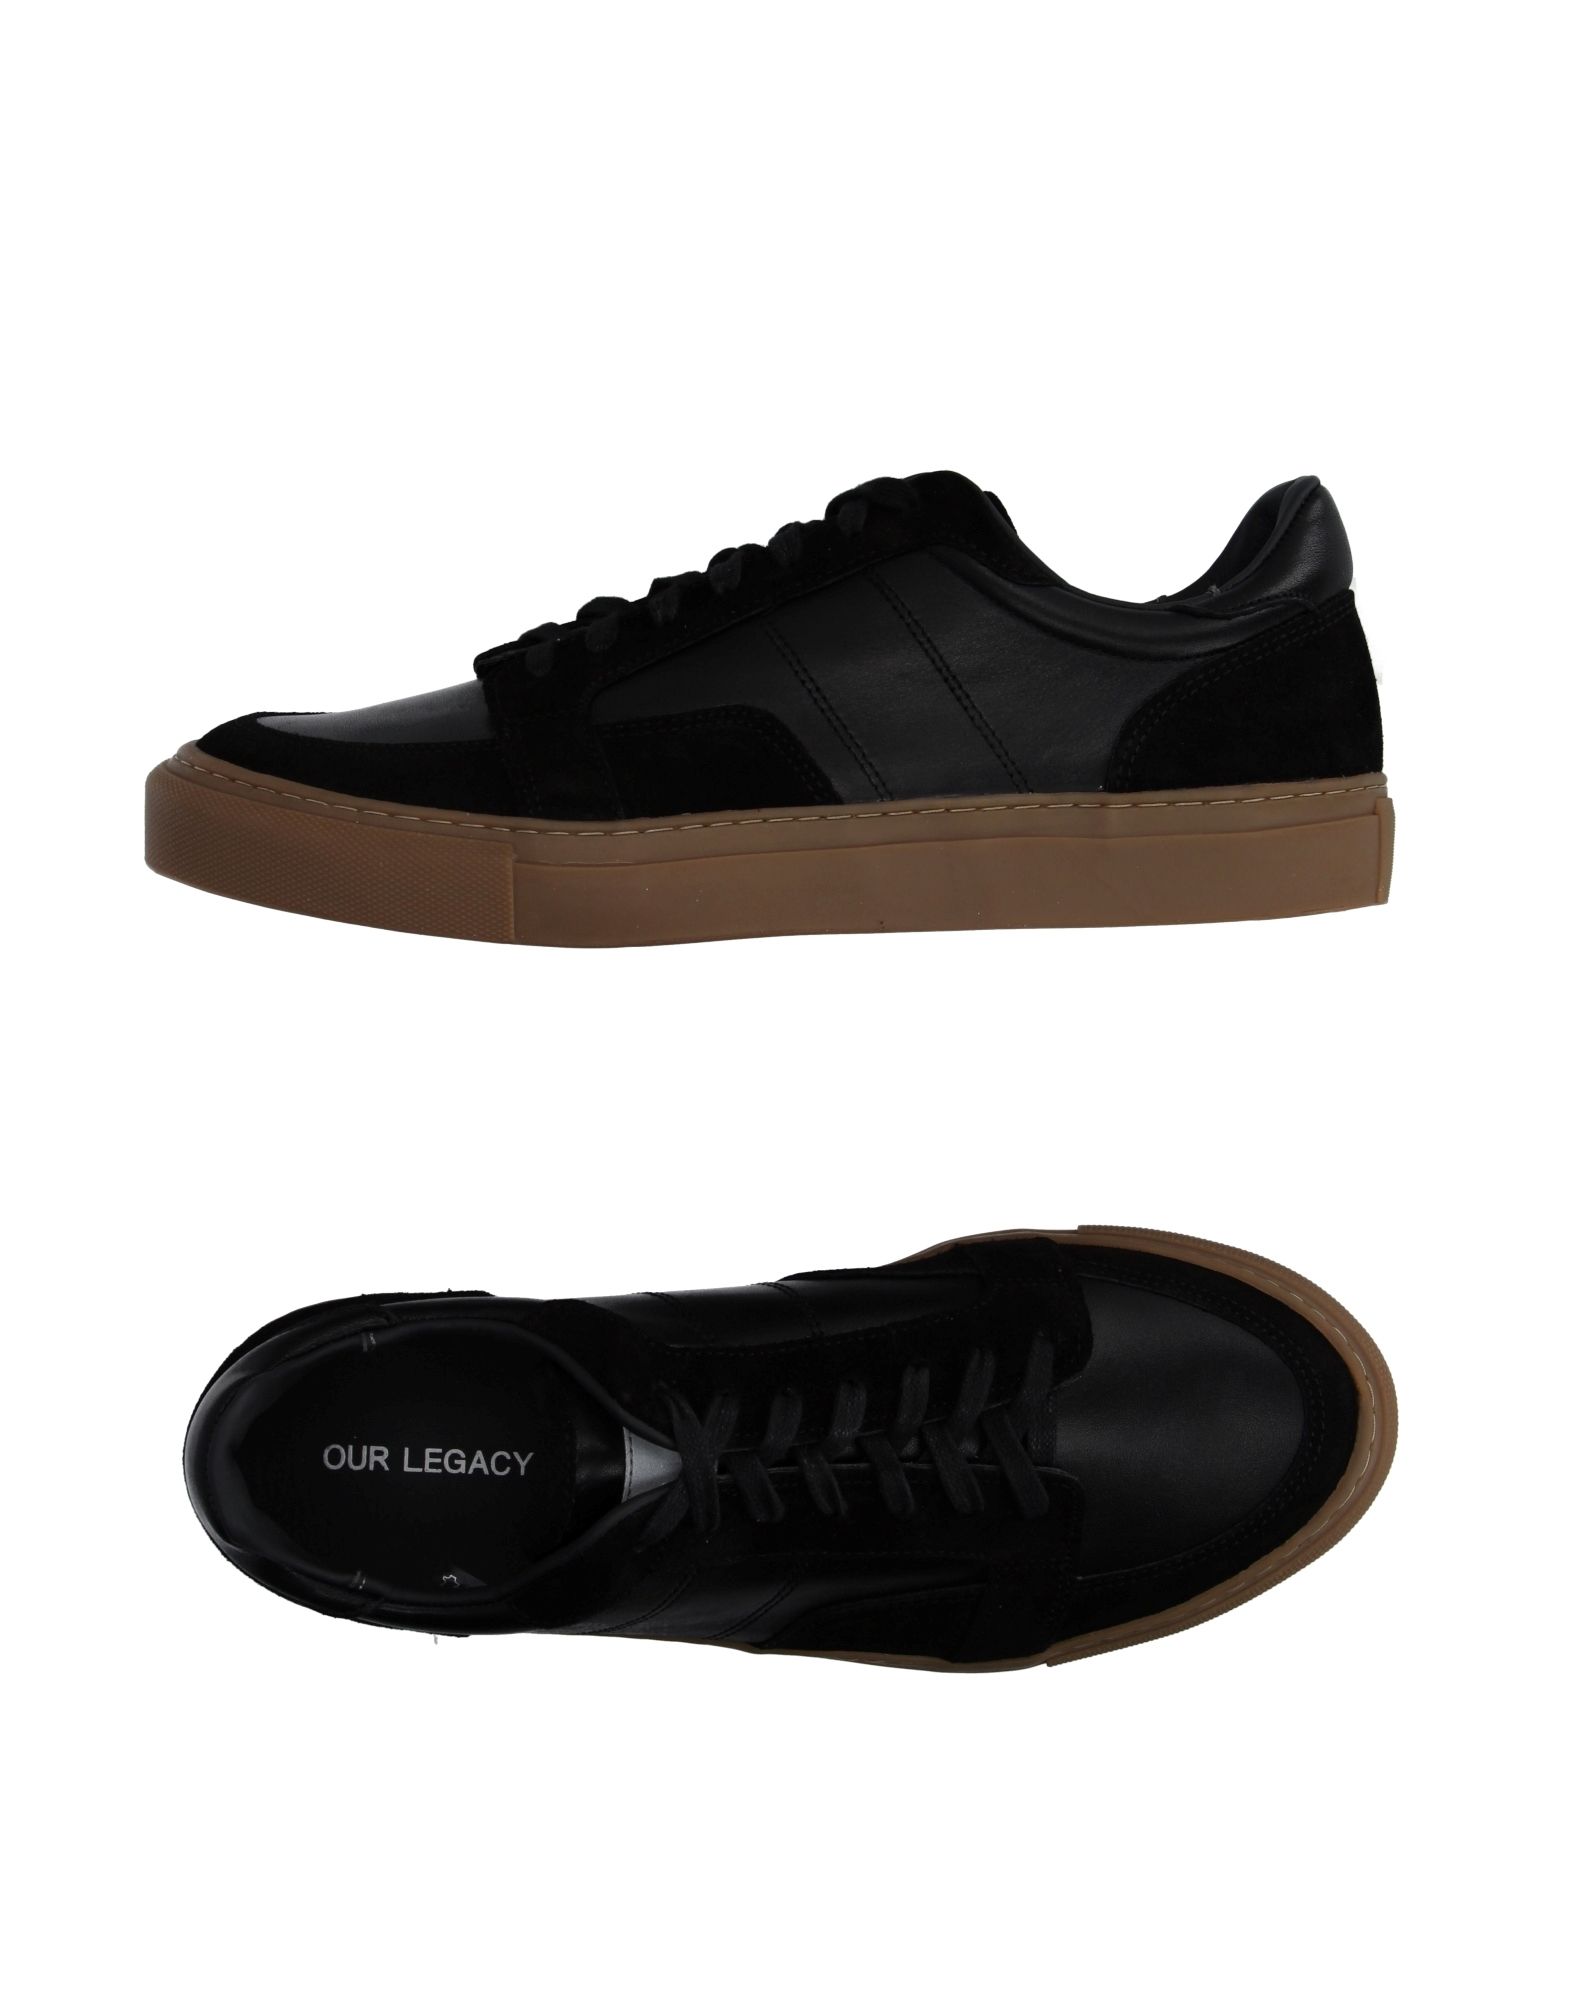 OUR LEGACY Sneakers,11059311IM 15